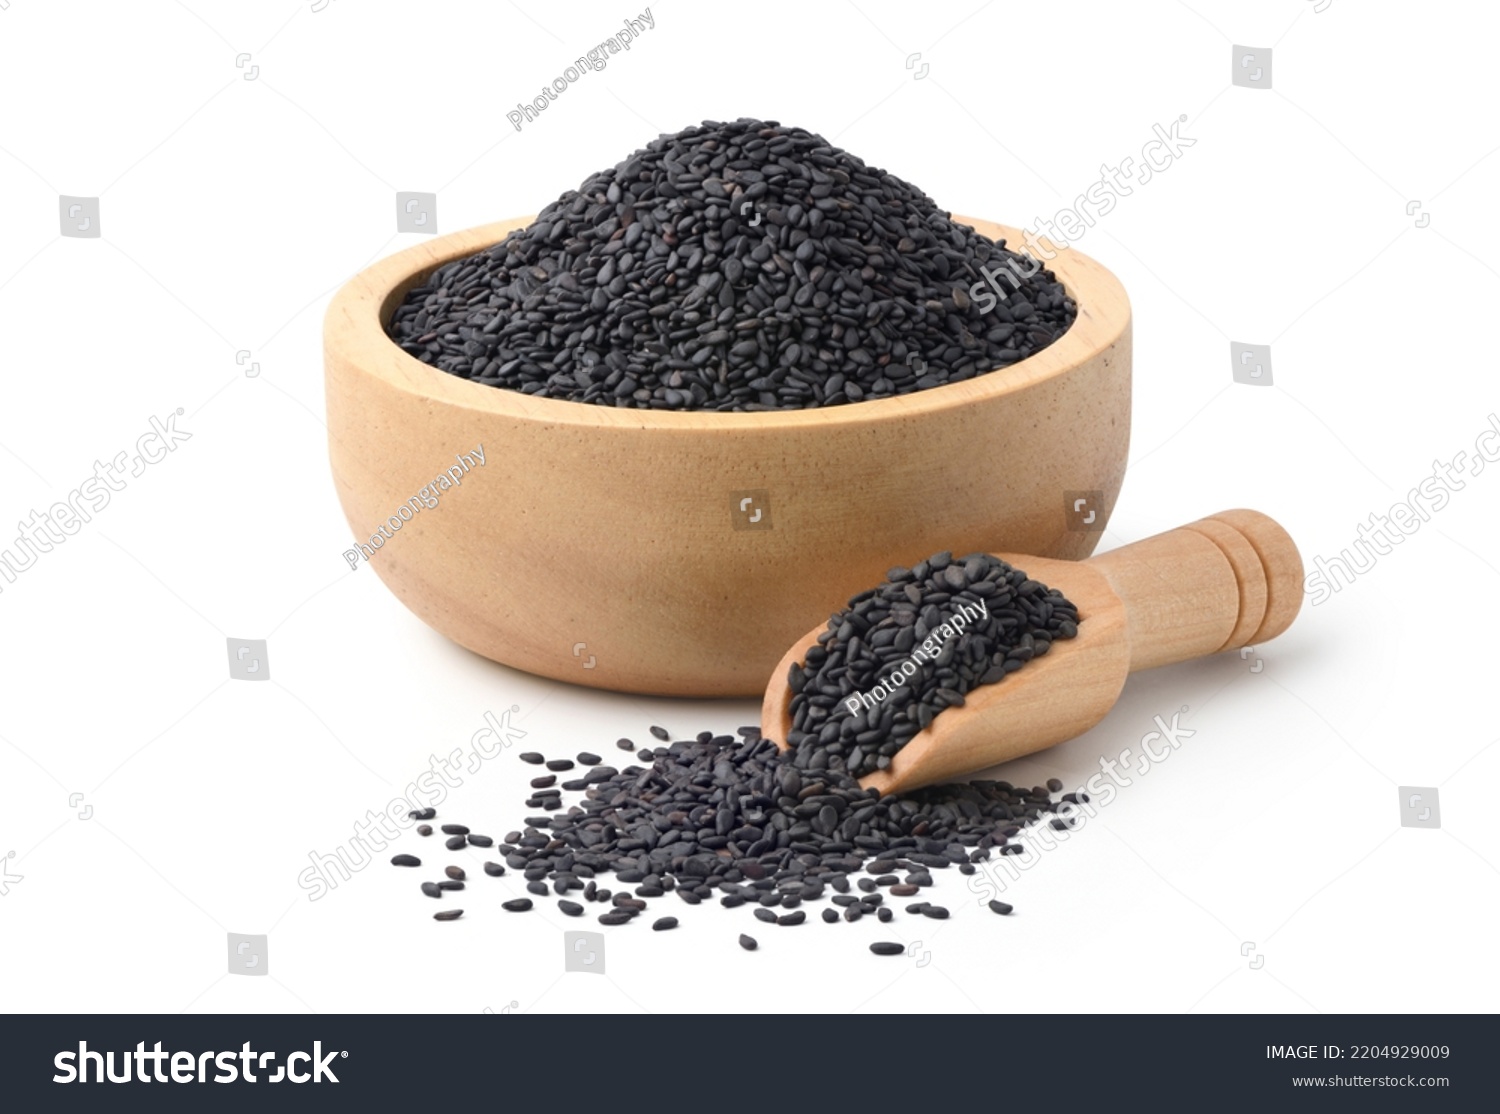 Black sesame seeds with wooden bowl and scoop isolated on white background. #2204929009